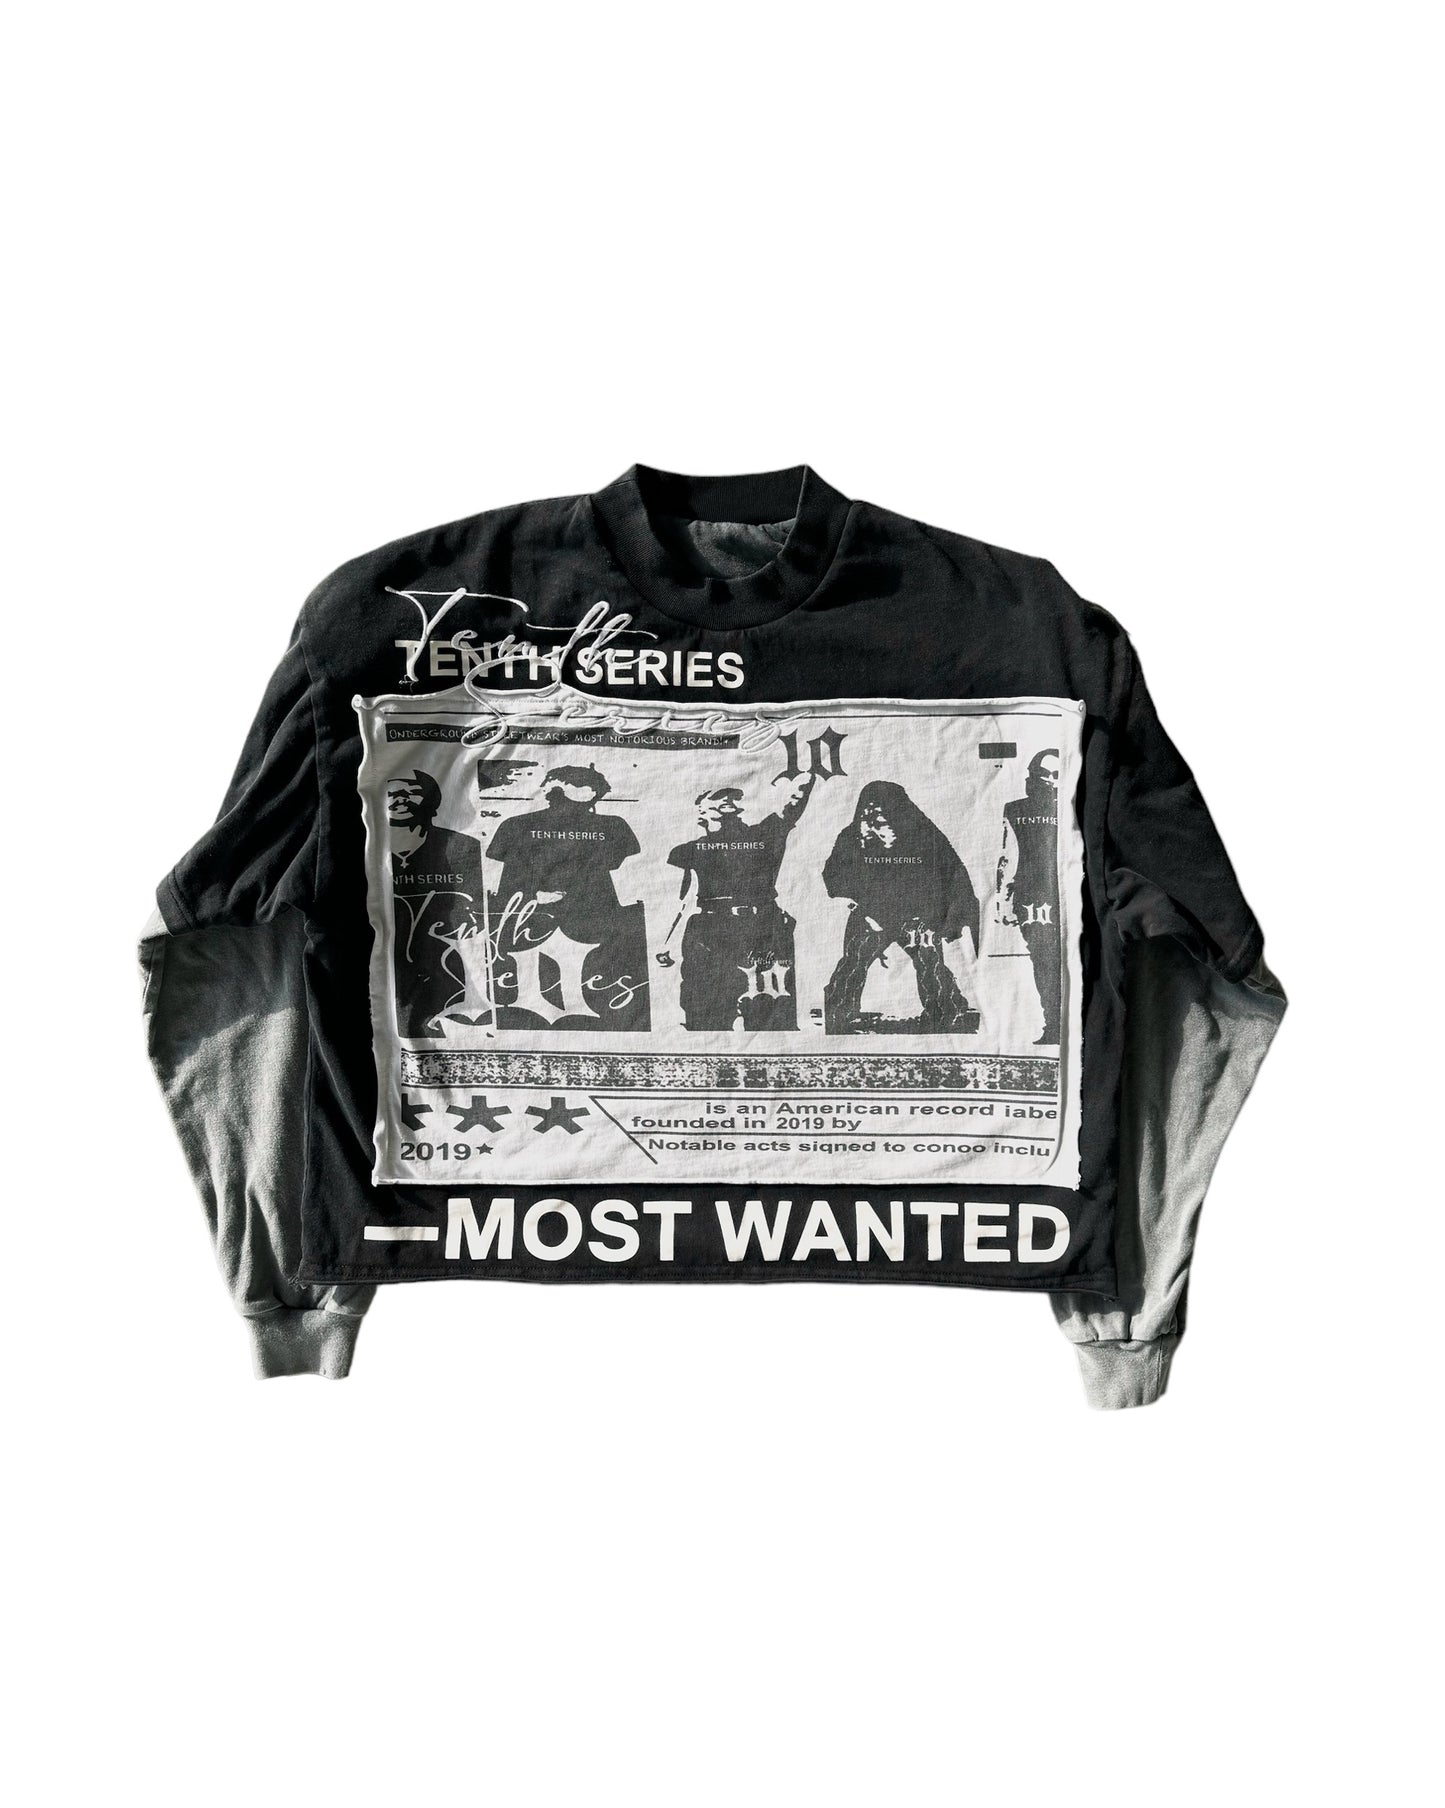 MOST WANTED LONG SLEEVE TEE